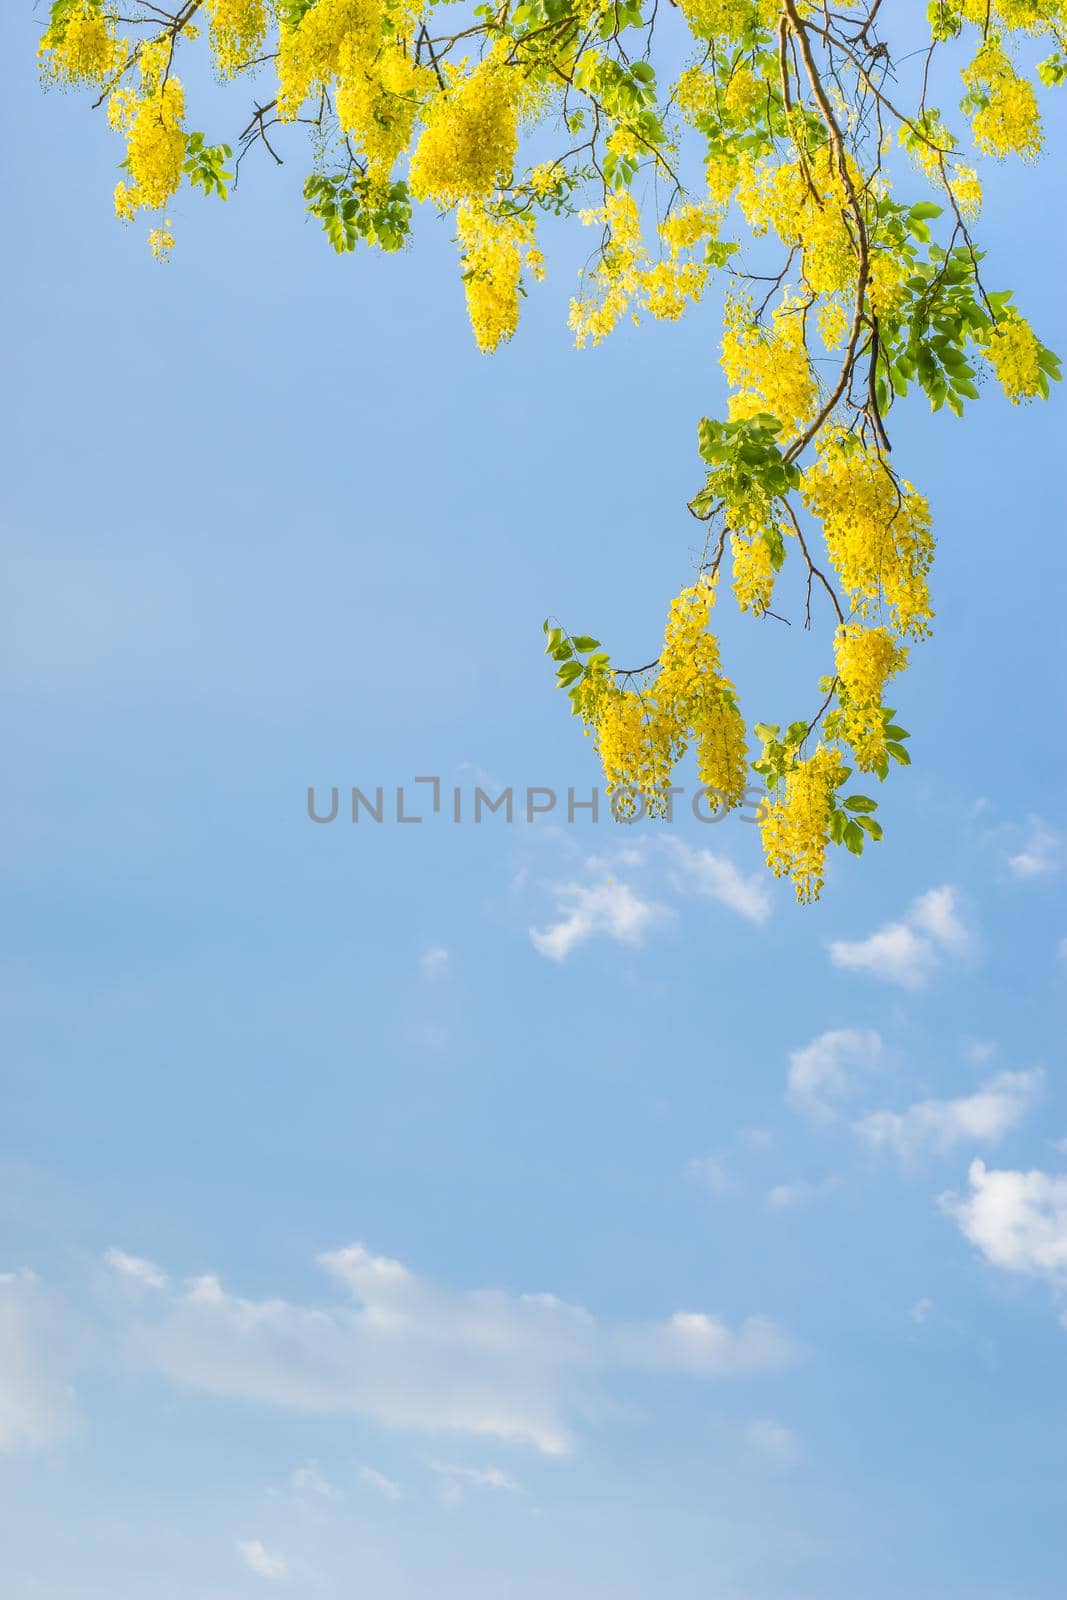 Golden shower flower is bloom and blue sky by domonite